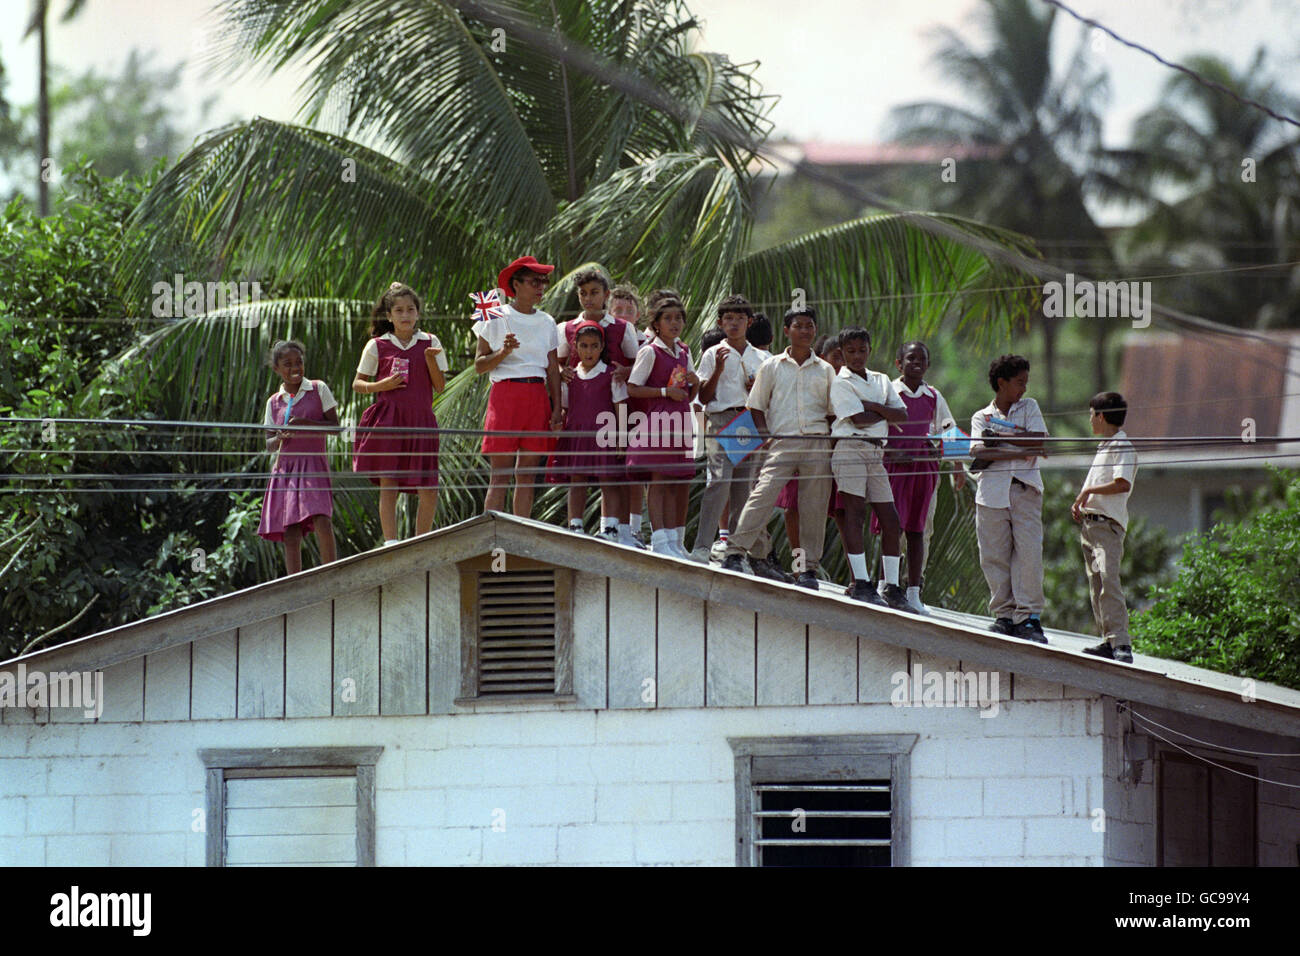 Schoolchildren find a vantage point on a rooftop as they watch for the Queen and Duke of Edinburgh during a visit to the provincial town of San Ignacio on a visit to Belize. Stock Photo